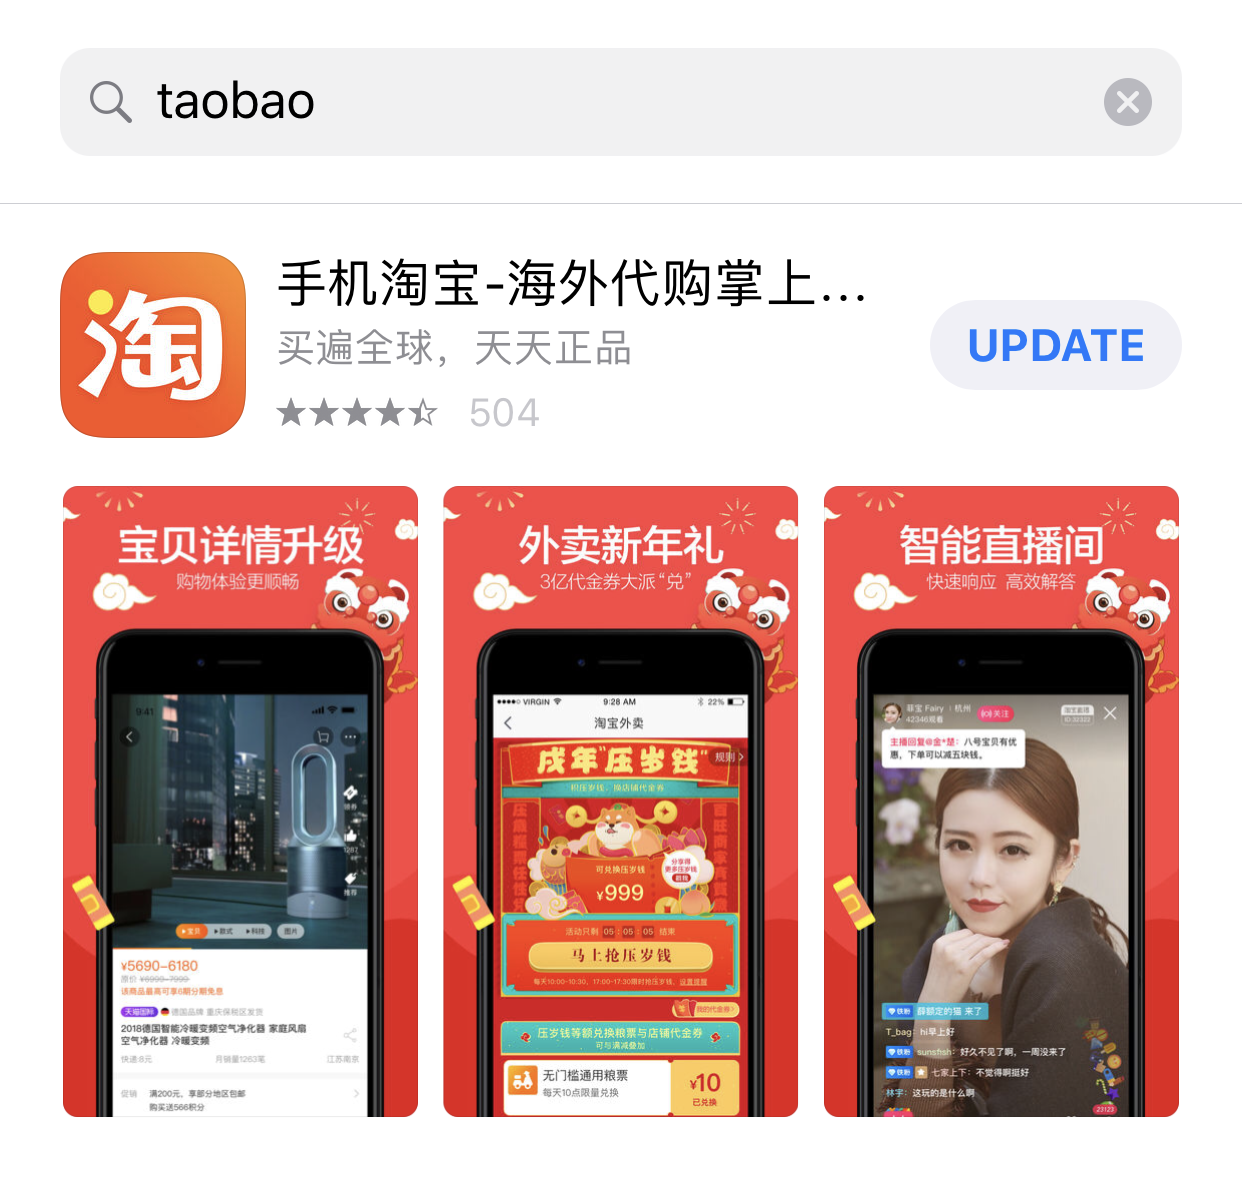 Guide To Setting Up Your Taobao Account